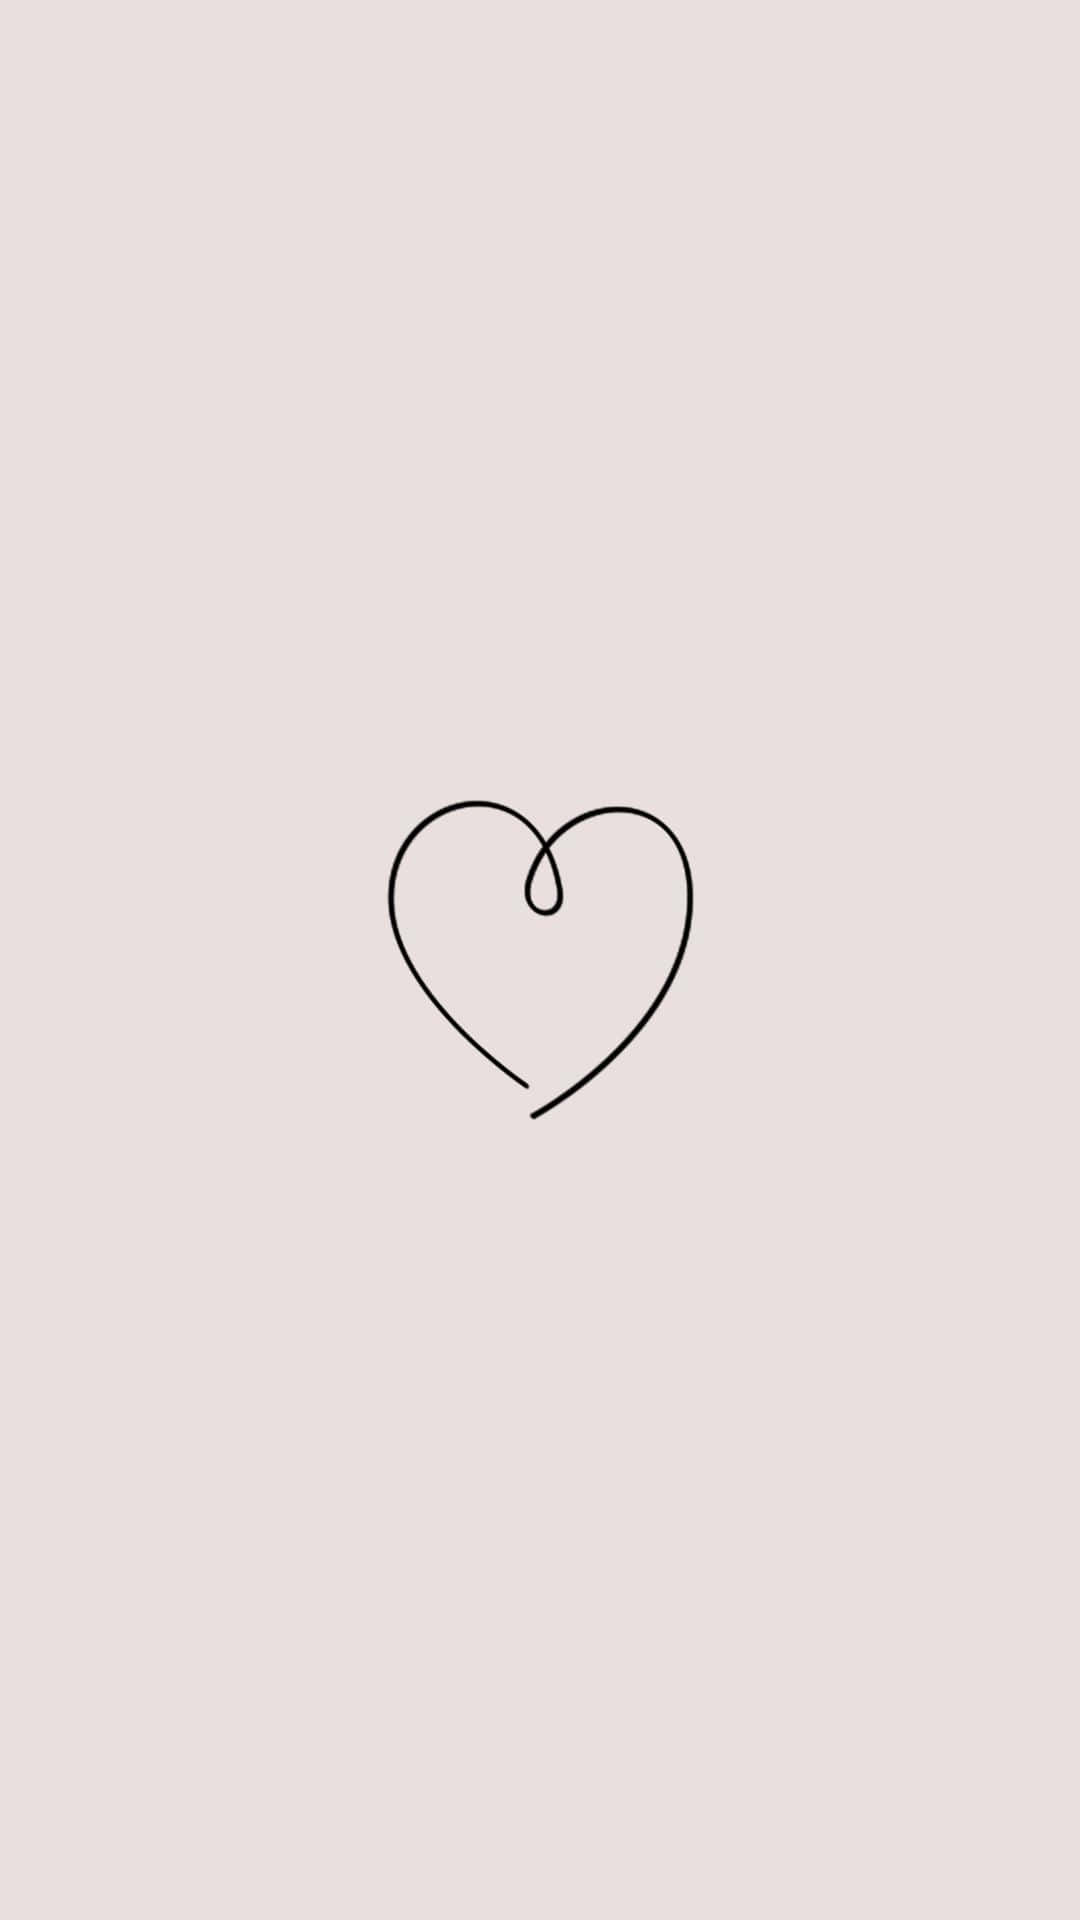 Ig Story Background Cute Heart Doodle